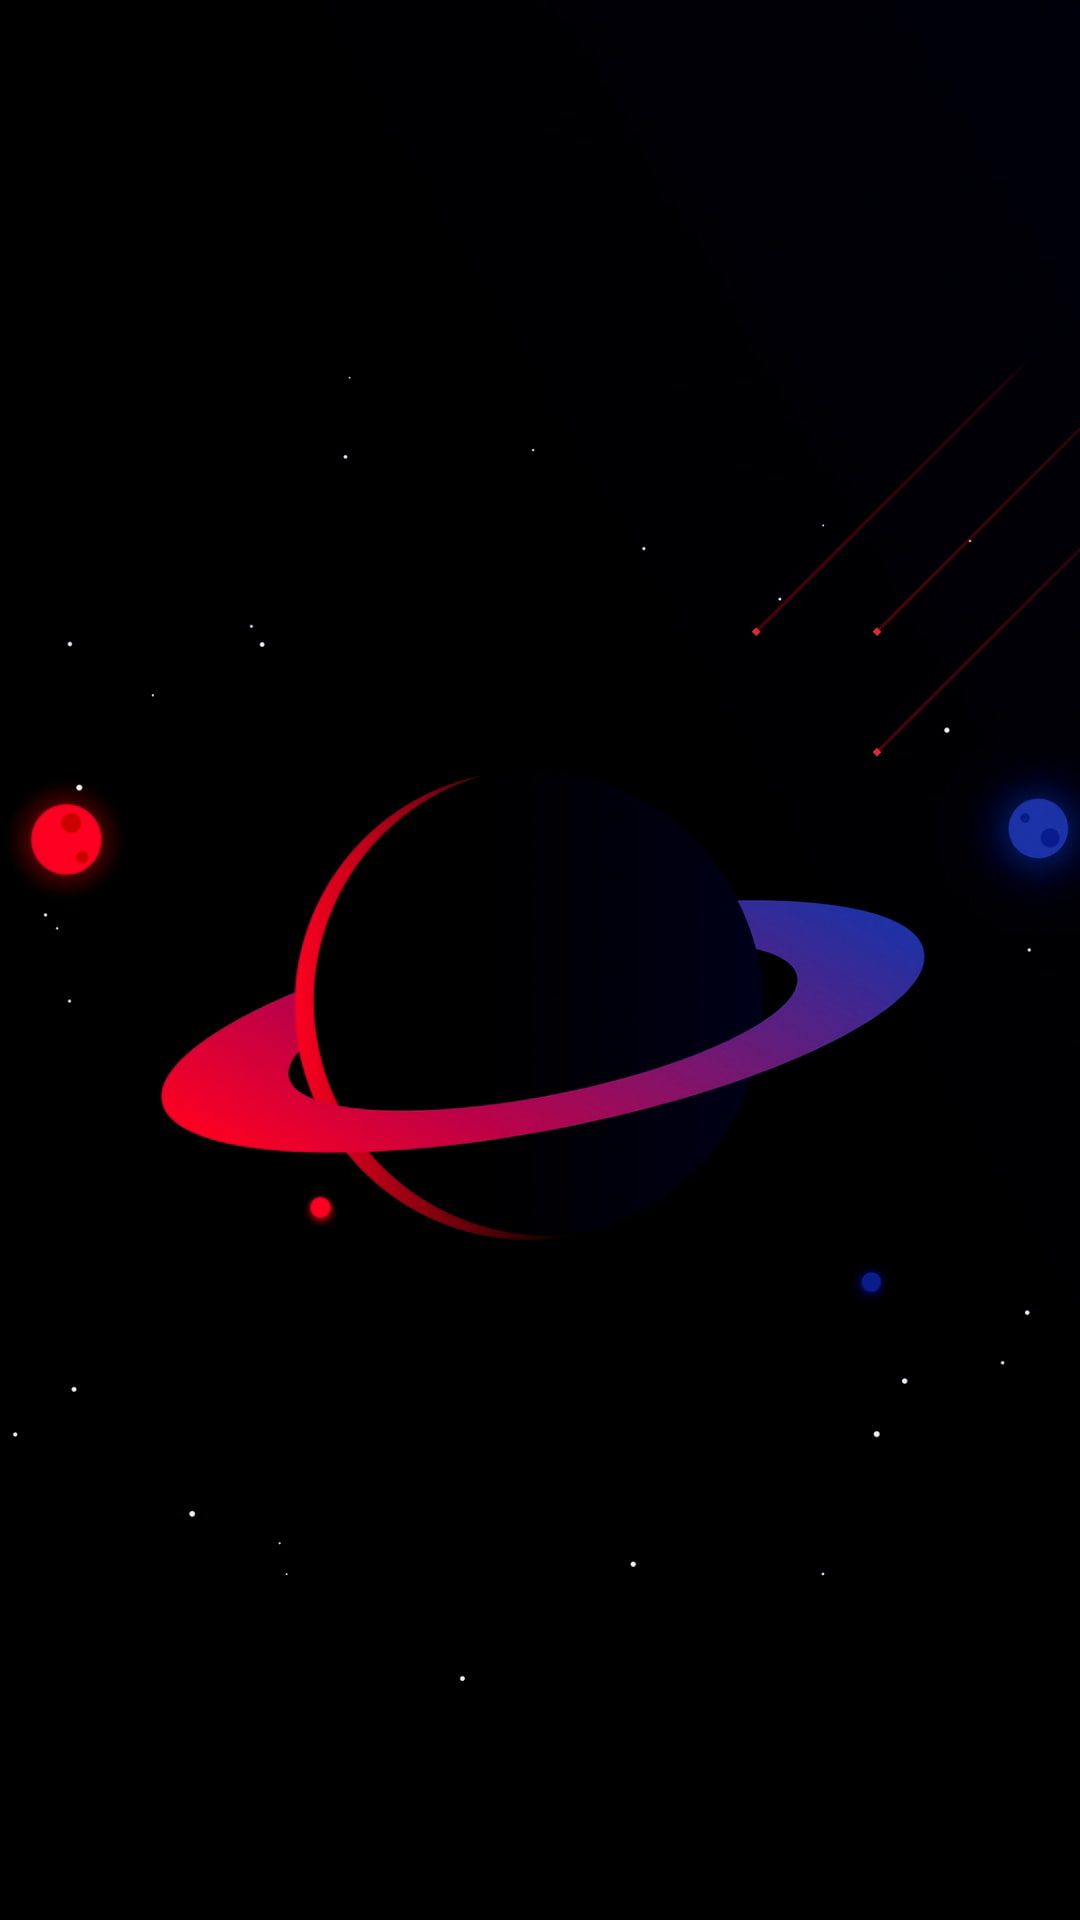 artwork #Saturn #space space art #colorful #planet planetary rings portrait display P #wall. Minimalist wallpaper, Space iphone wallpaper, Minimal wallpaper